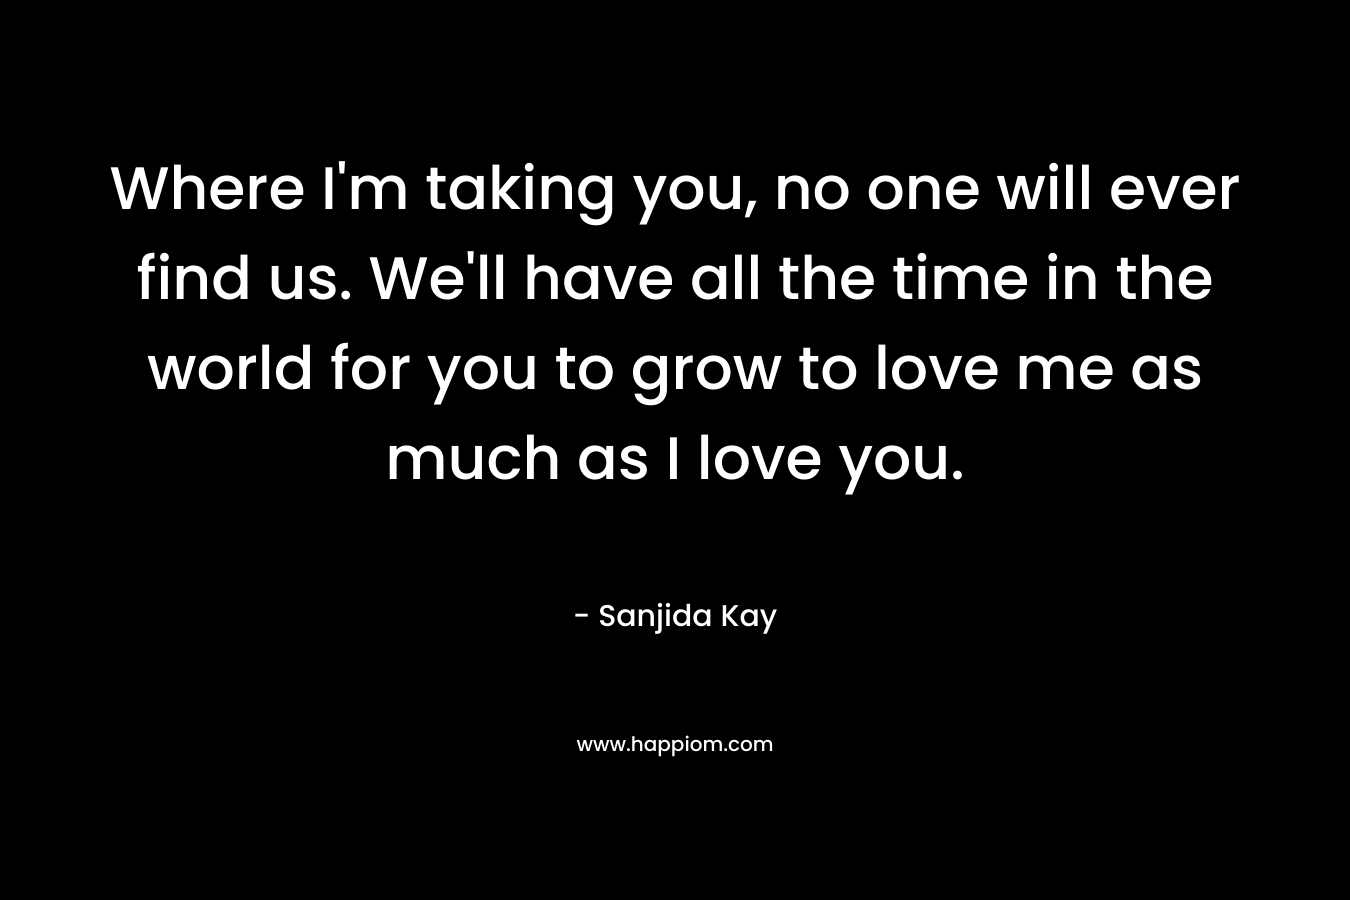 Where I’m taking you, no one will ever find us. We’ll have all the time in the world for you to grow to love me as much as I love you. – Sanjida Kay